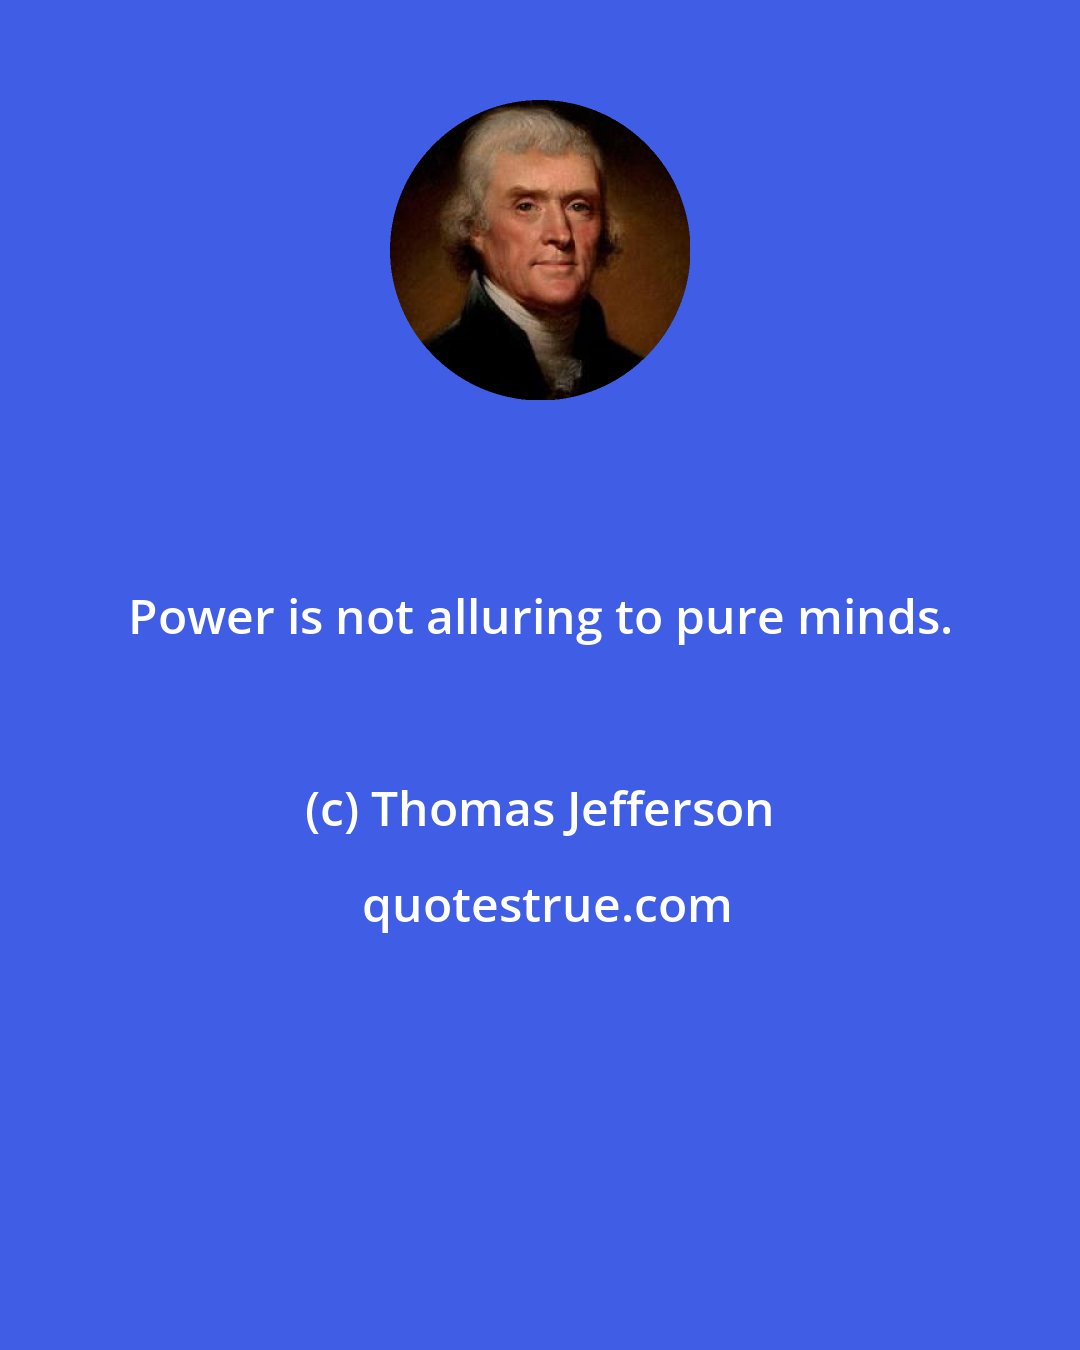 Thomas Jefferson: Power is not alluring to pure minds.